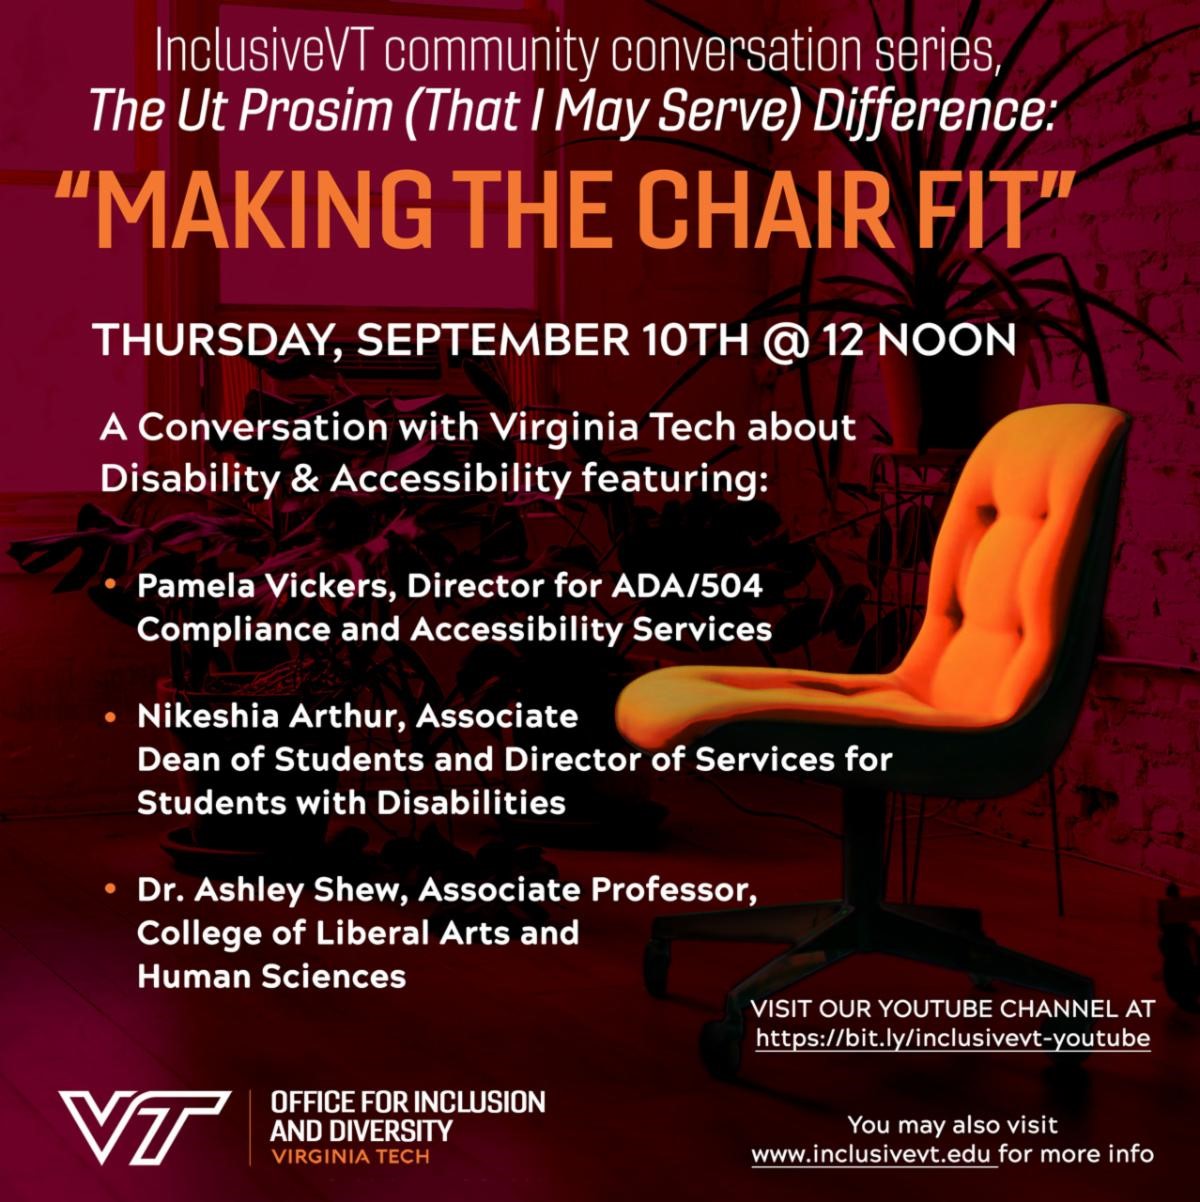 Making the Chair Fit: A Conversation on Disability & Accessibility